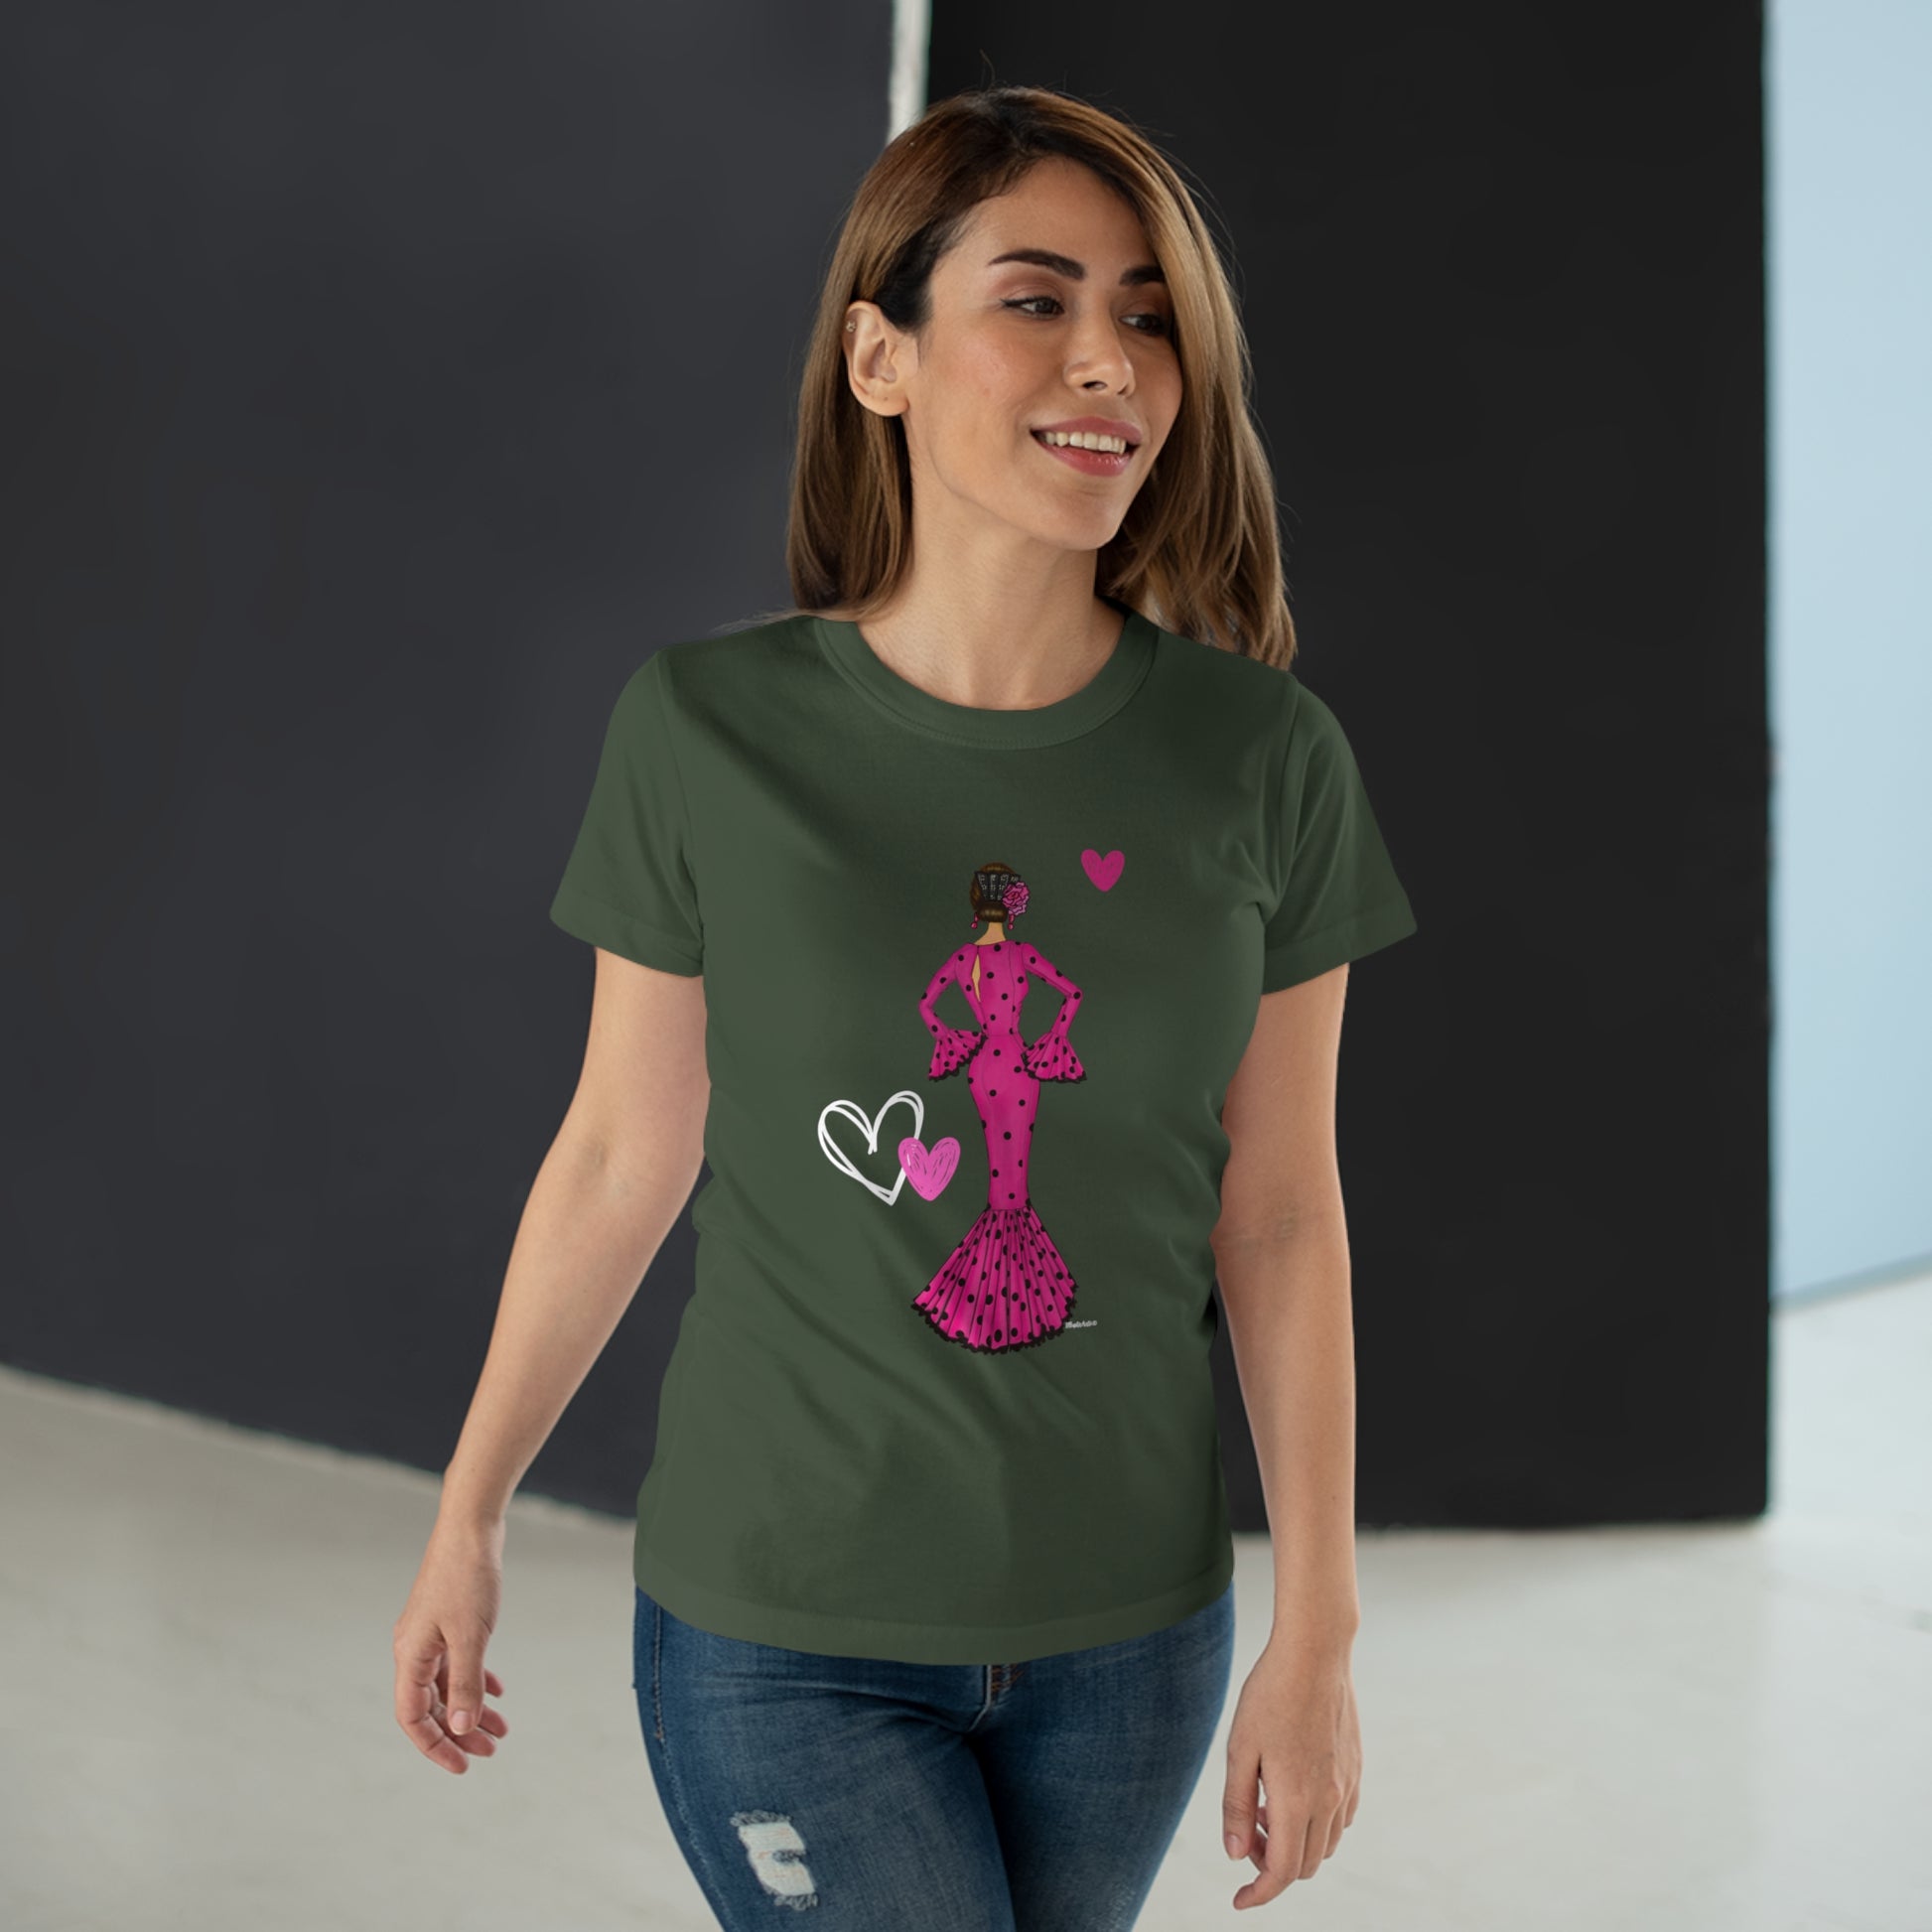 a woman wearing a green t - shirt with a pink silhouette of a woman